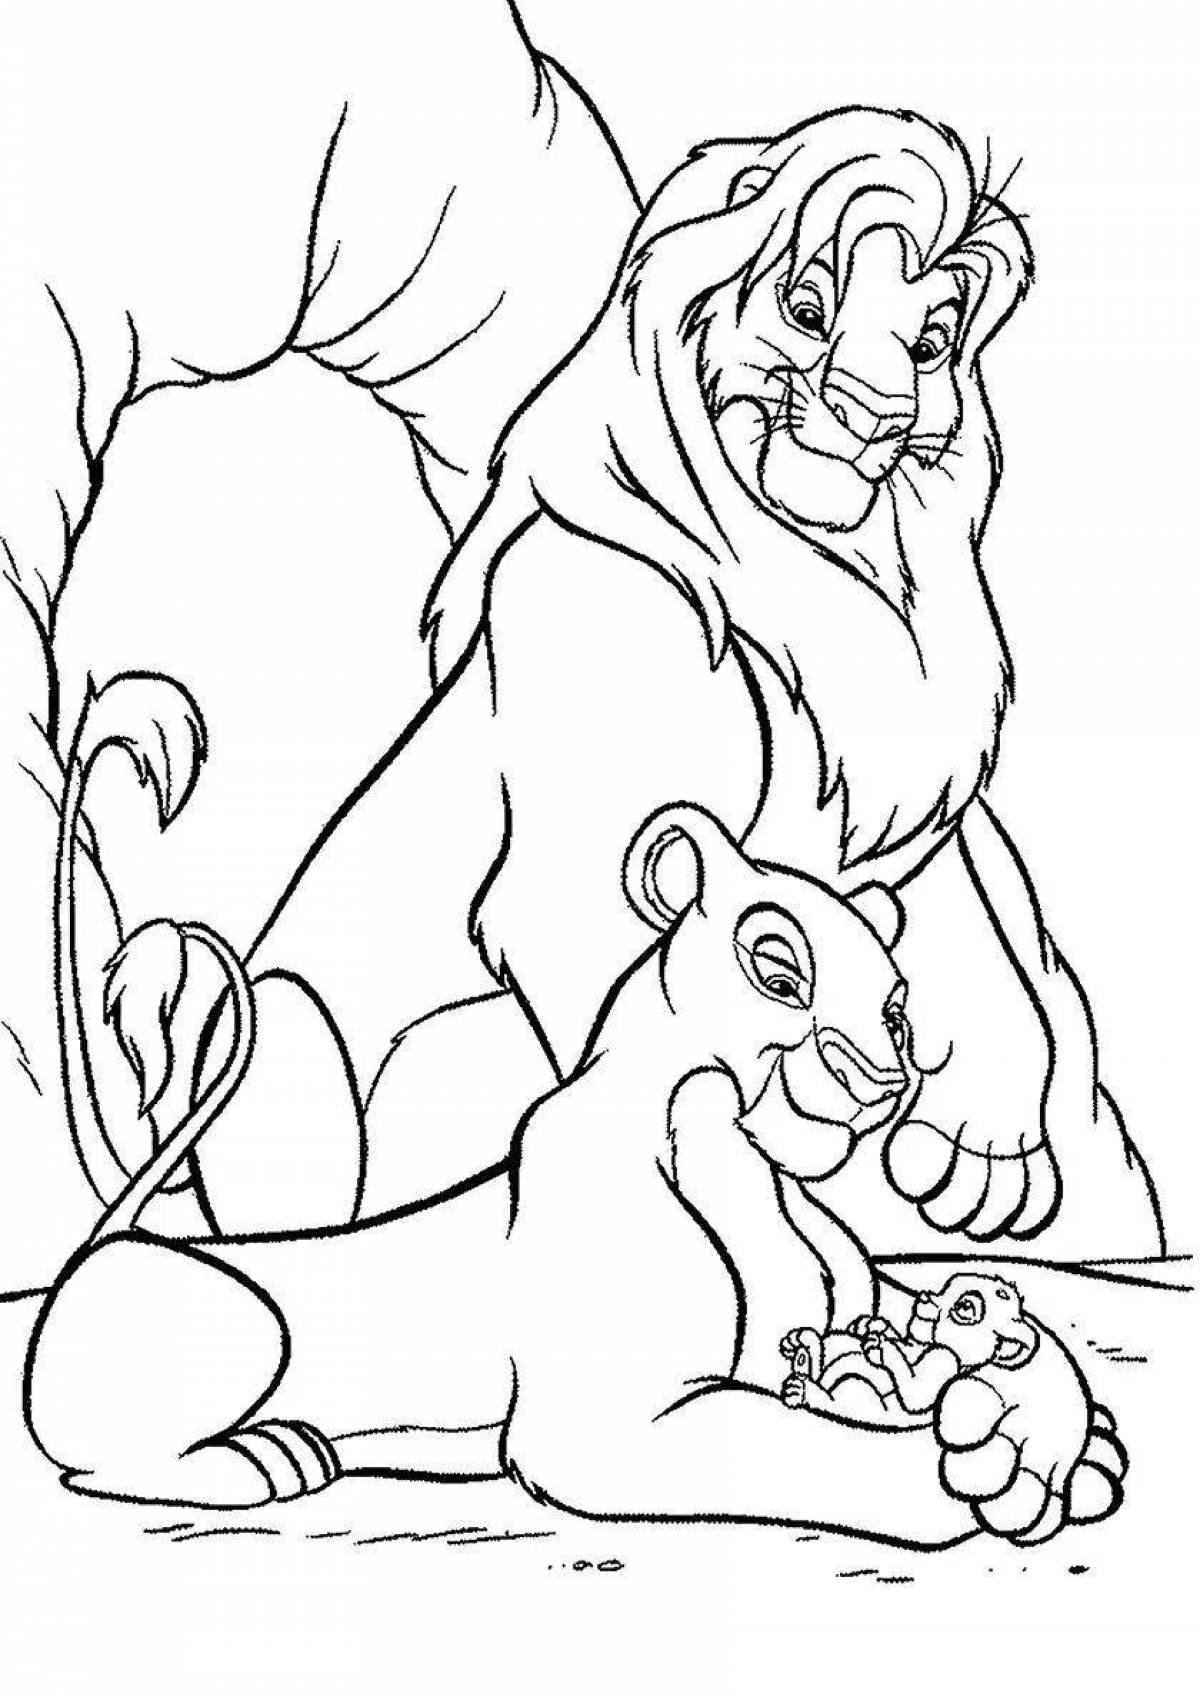 A fun lion king coloring book for kids